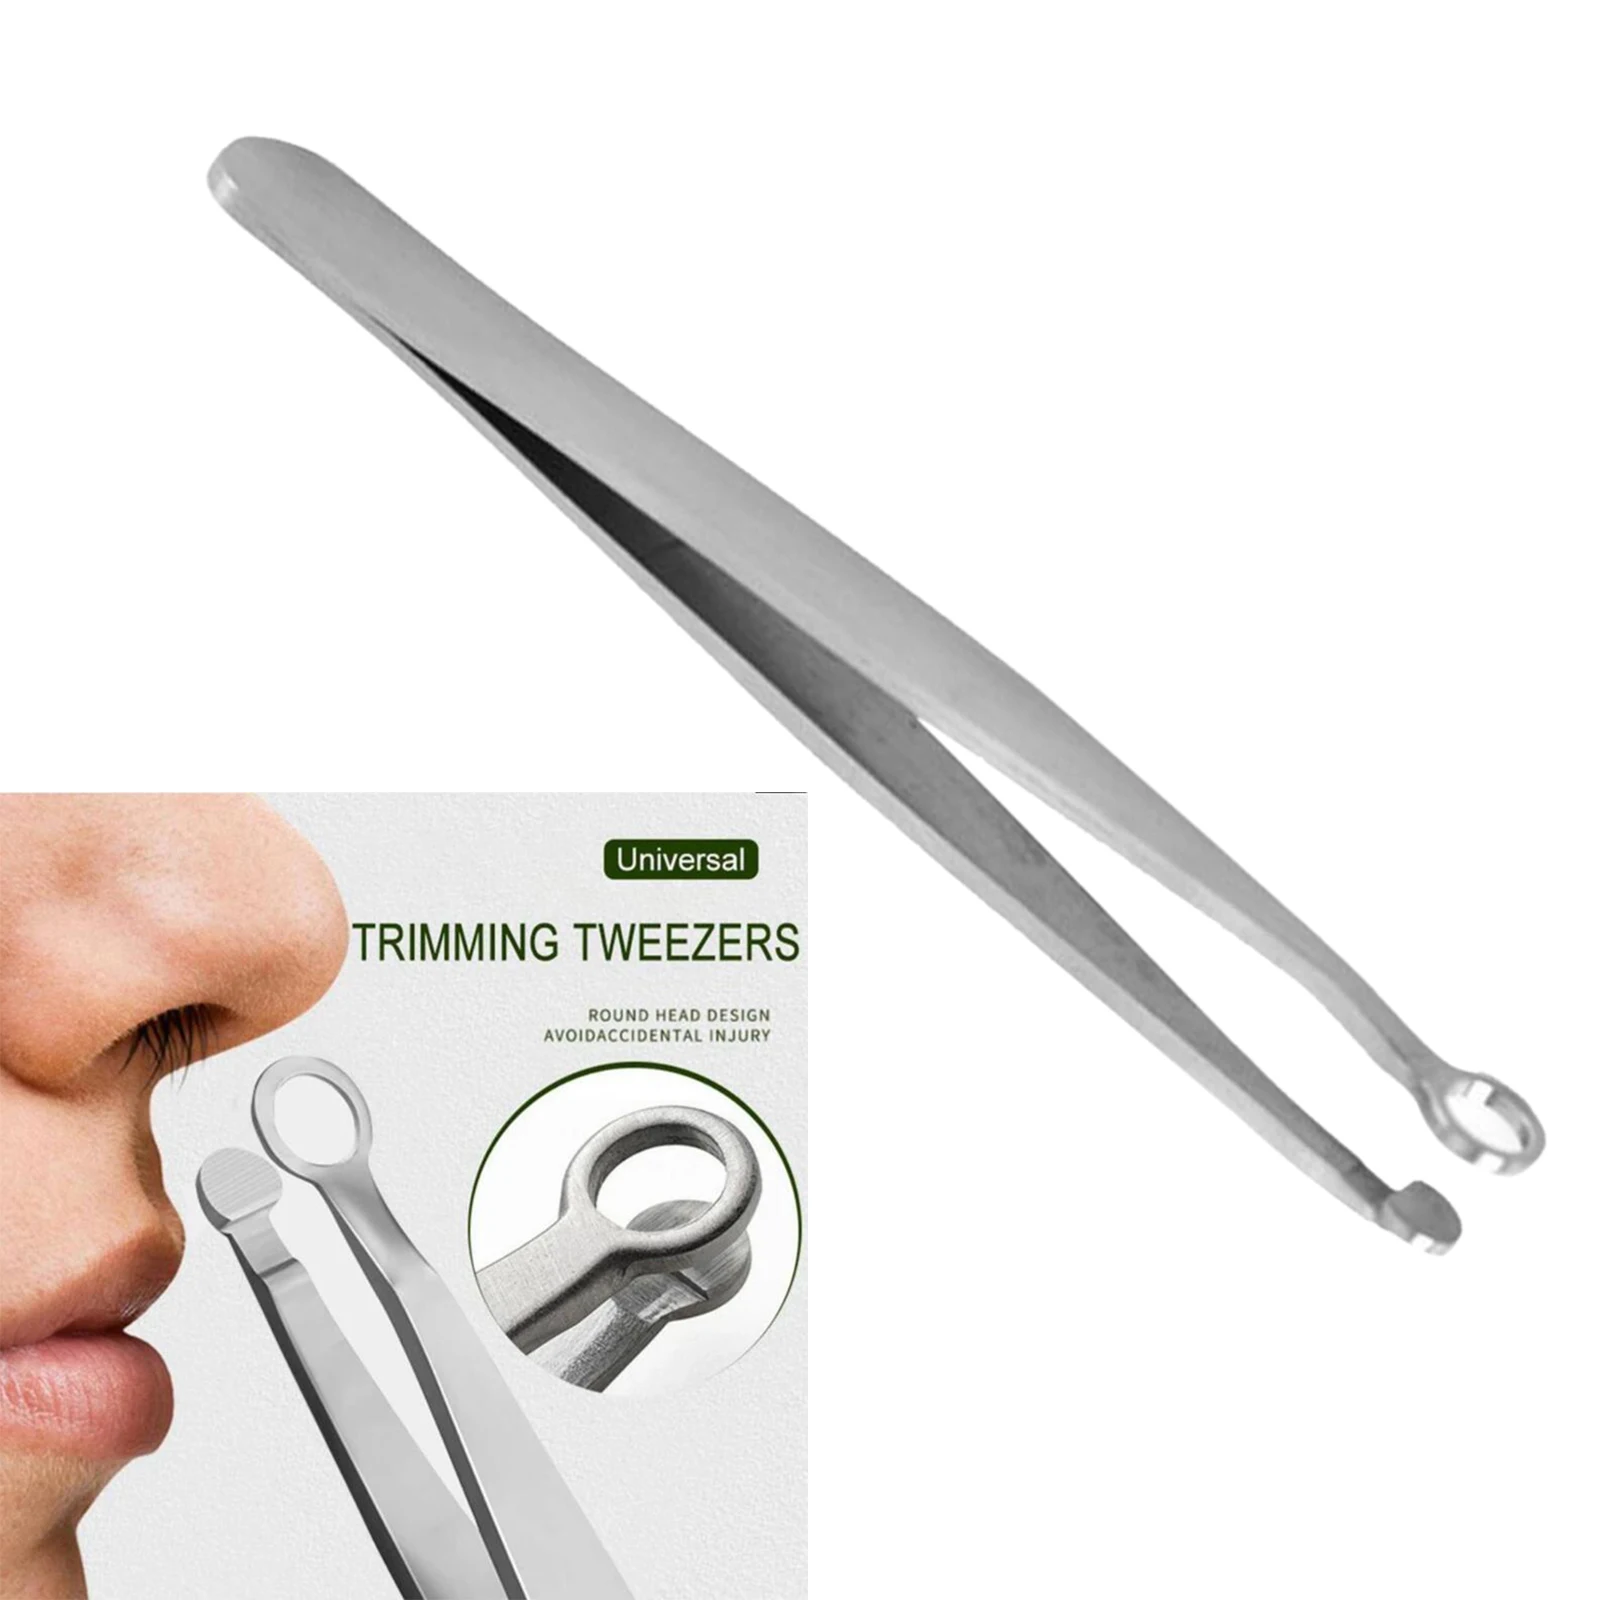 Universal Nose Hair Trimming Tweezers Safe Face Hair Trimmer Makeup Tools Durable for Long Time Use